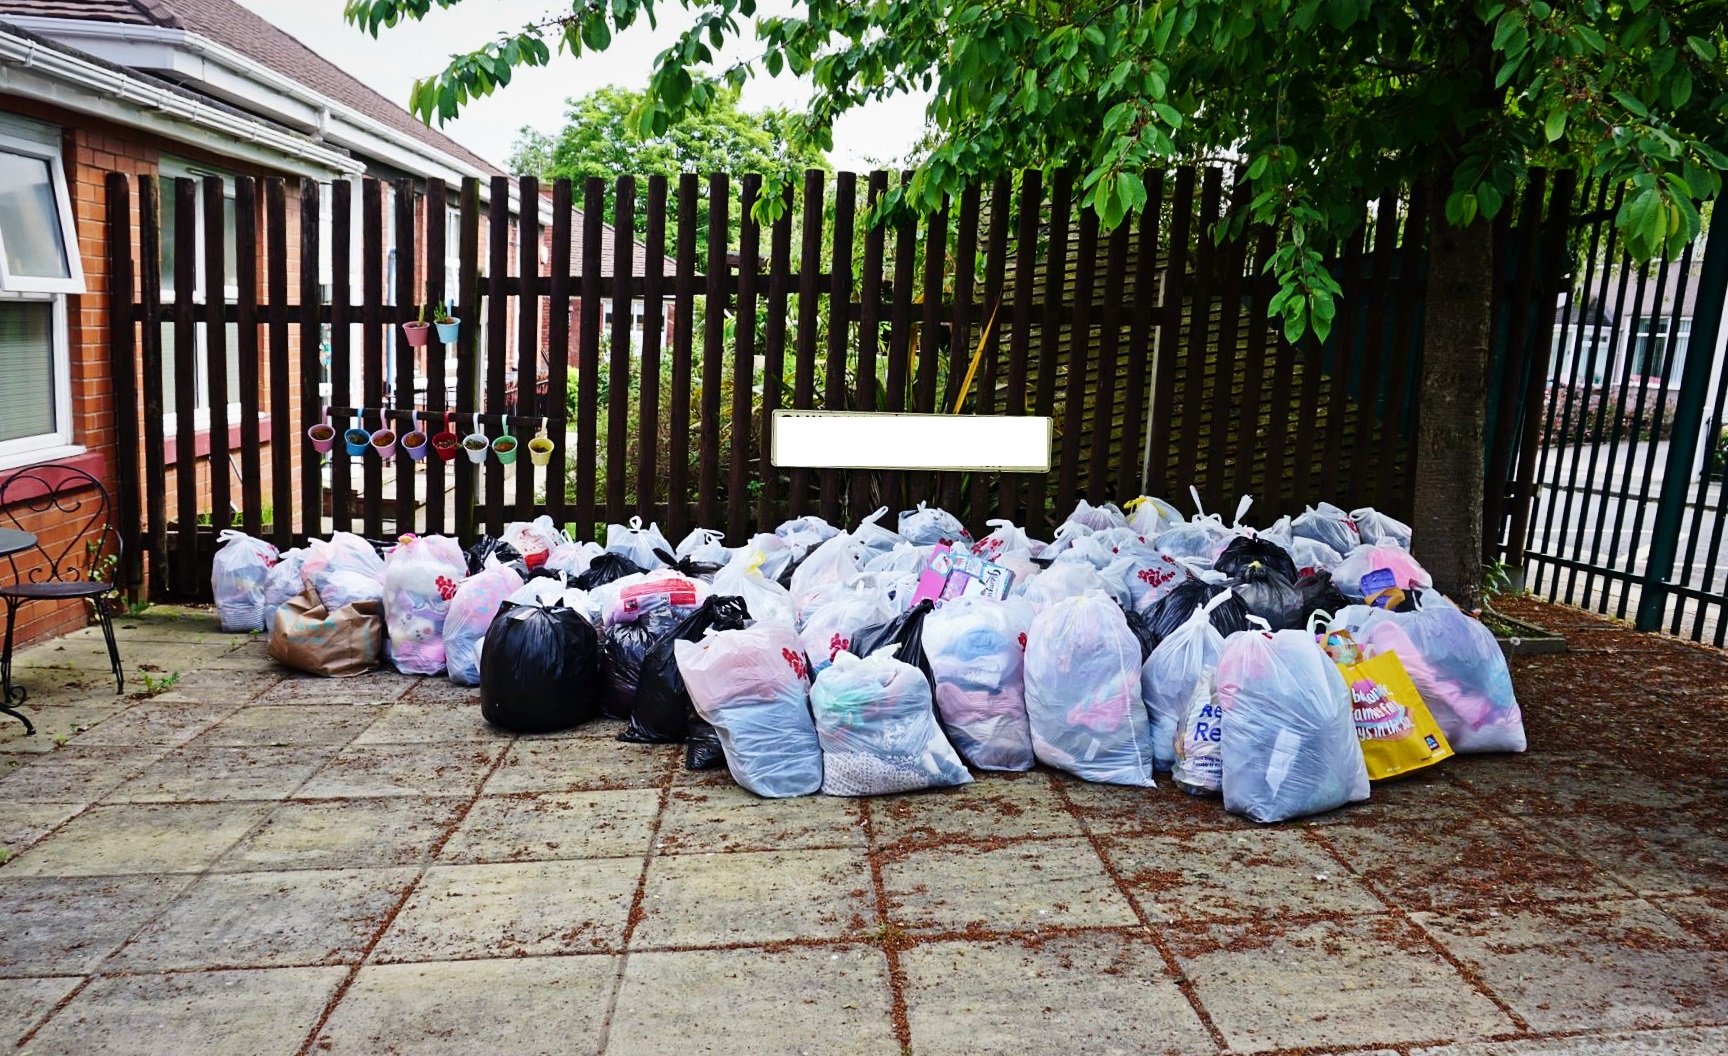 Rudston Primary School Achieves a Remarkable 480 kgs in Clothing Collection!